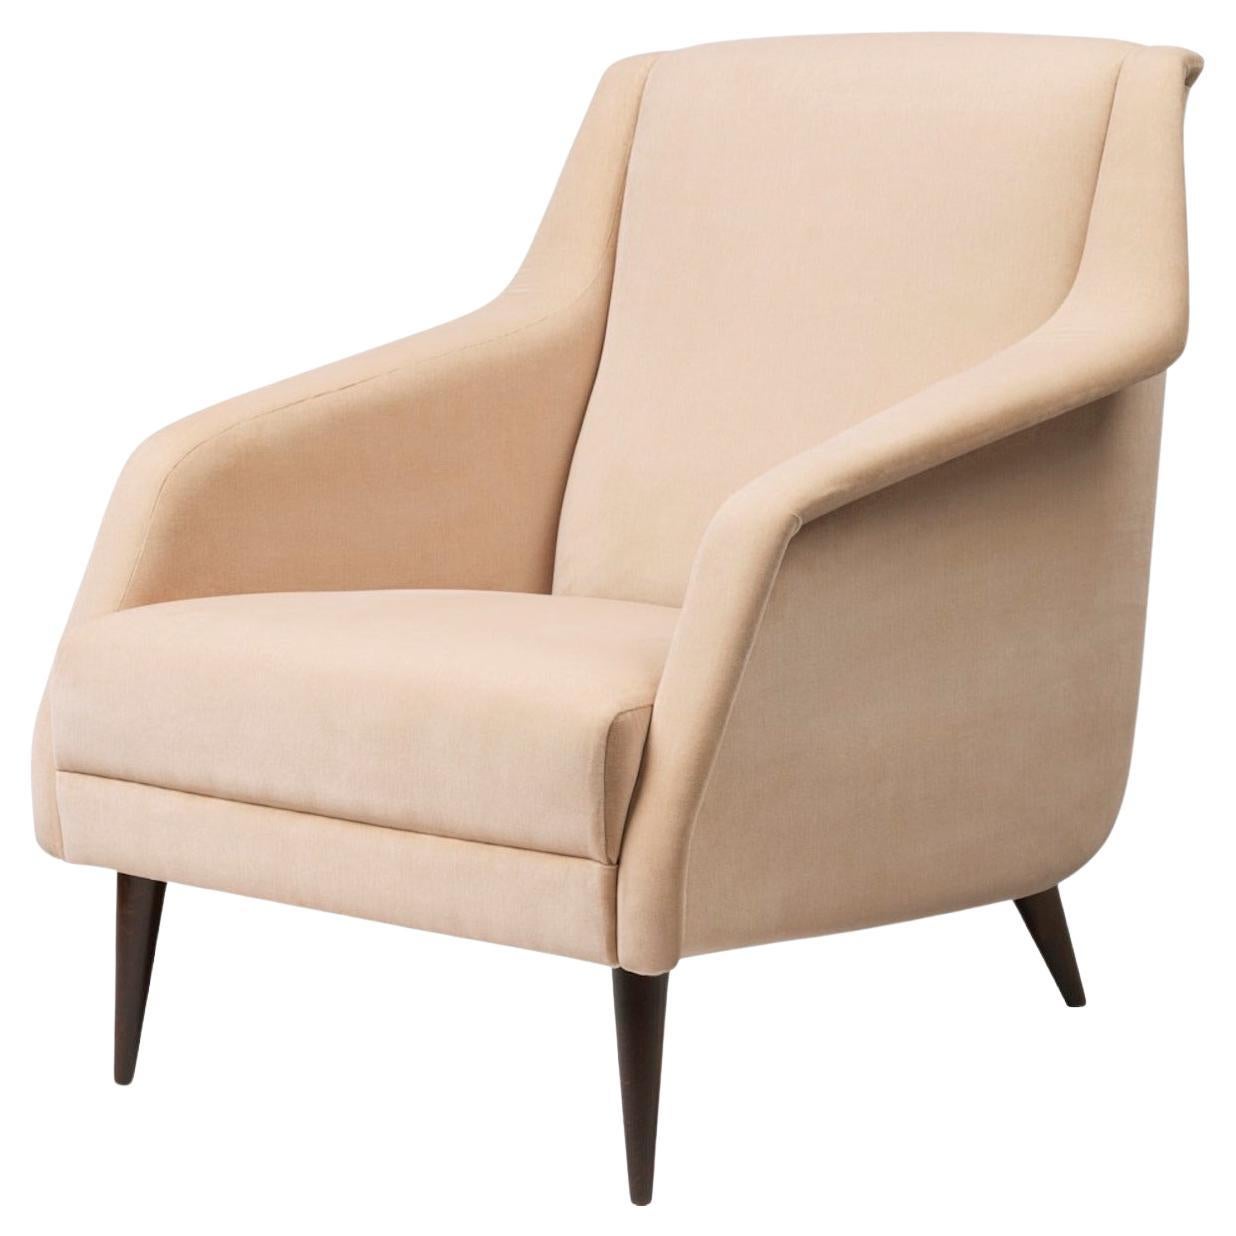 Customizable Gubi CDC Lounge Chair Fully Upholstered Designed by Carlo de Carli For Sale